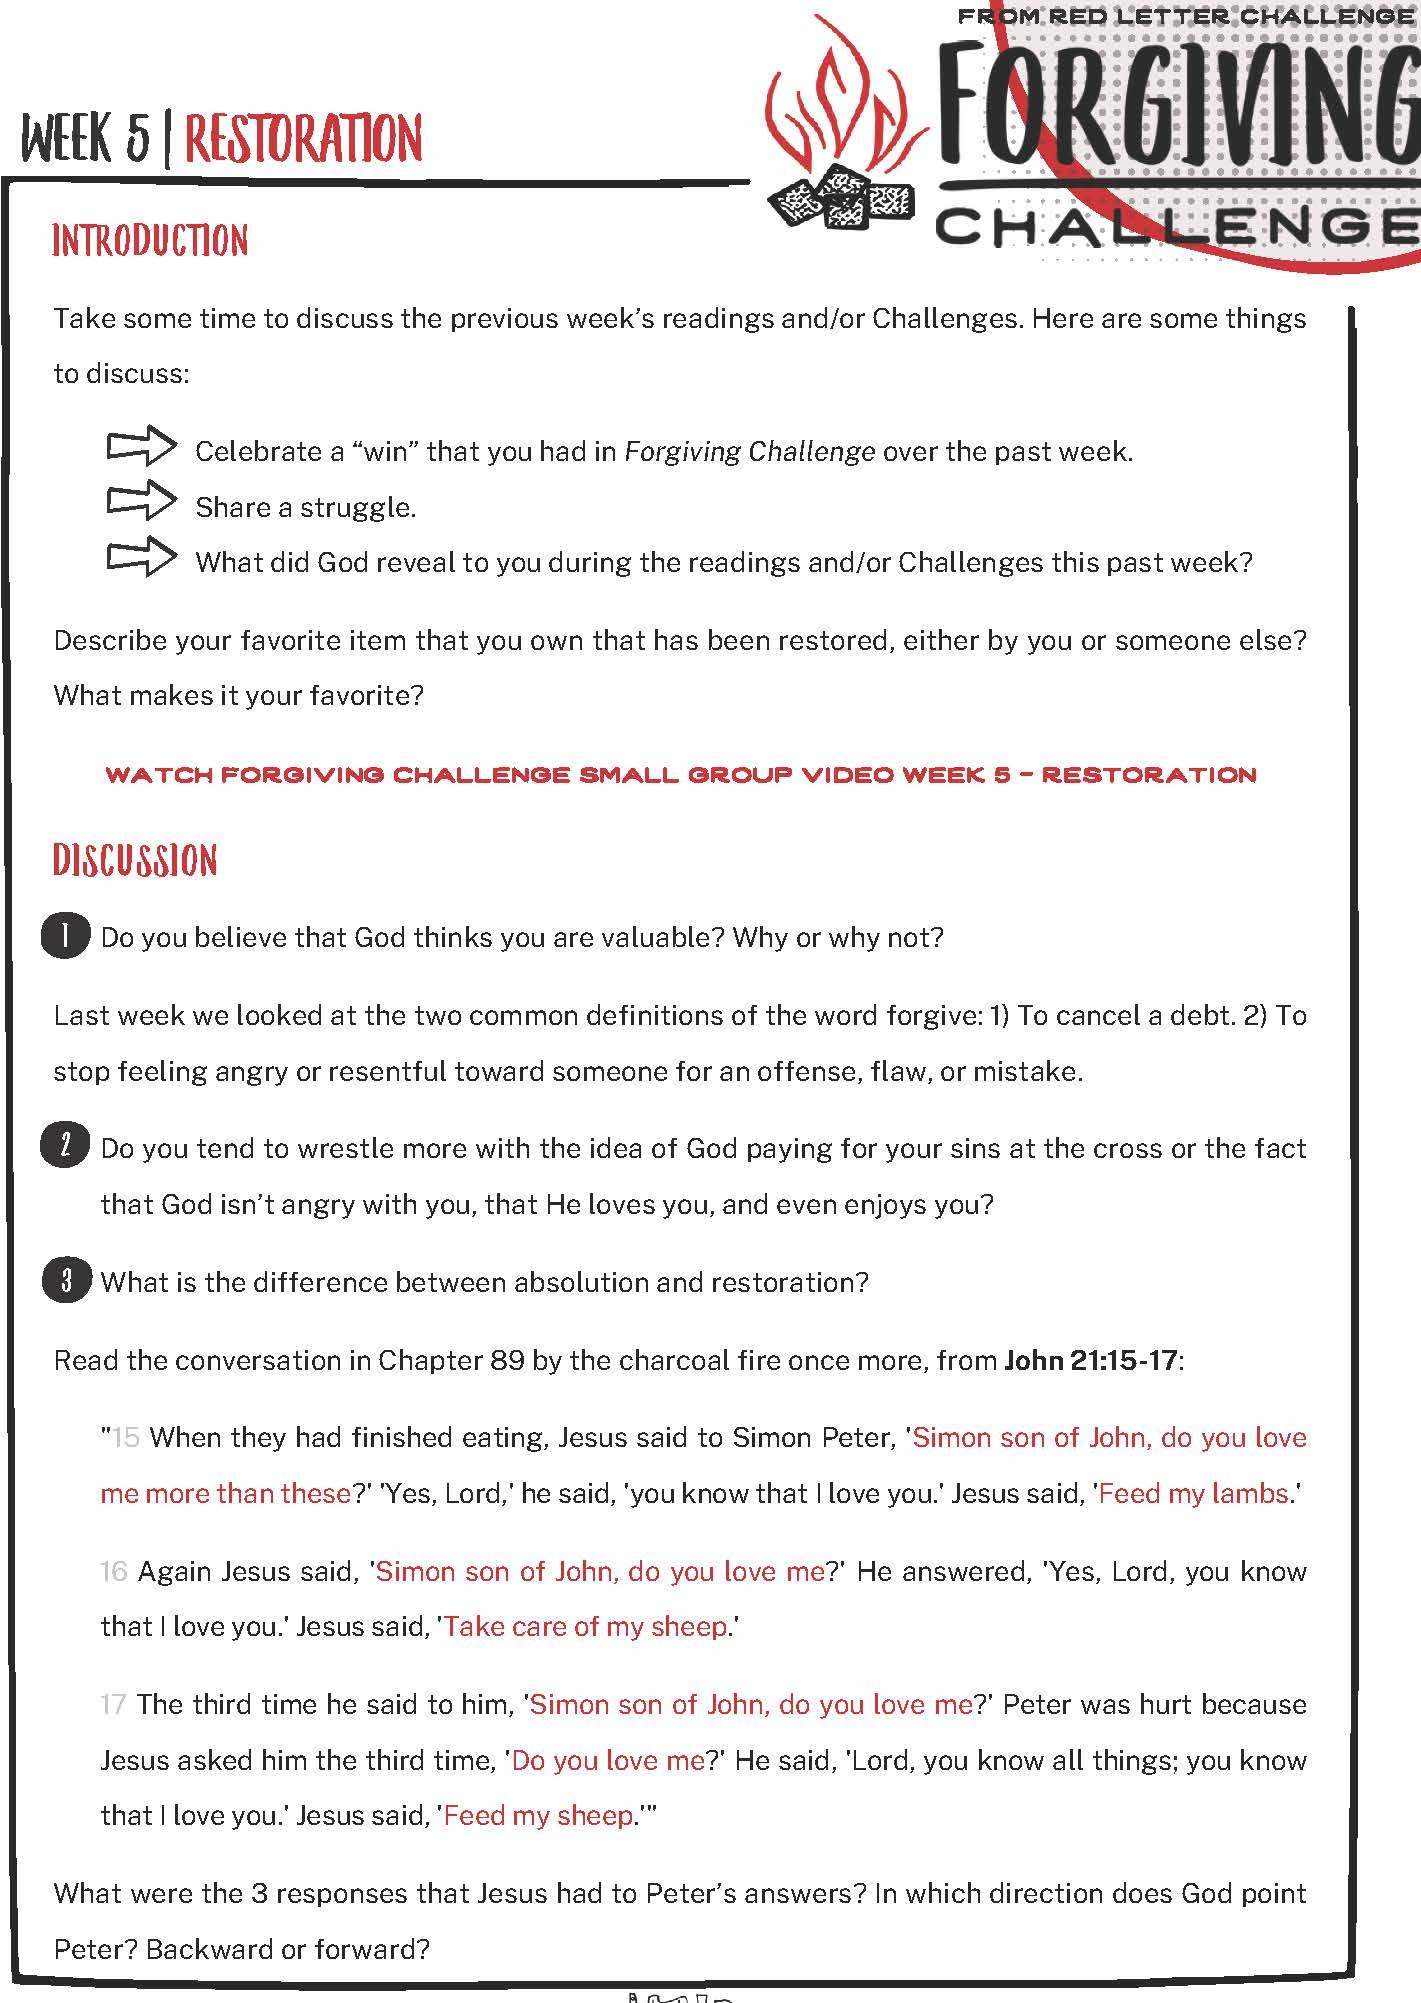 Forgiving Challenge Adult Small Group Discussion Guides_Page_16.jpg